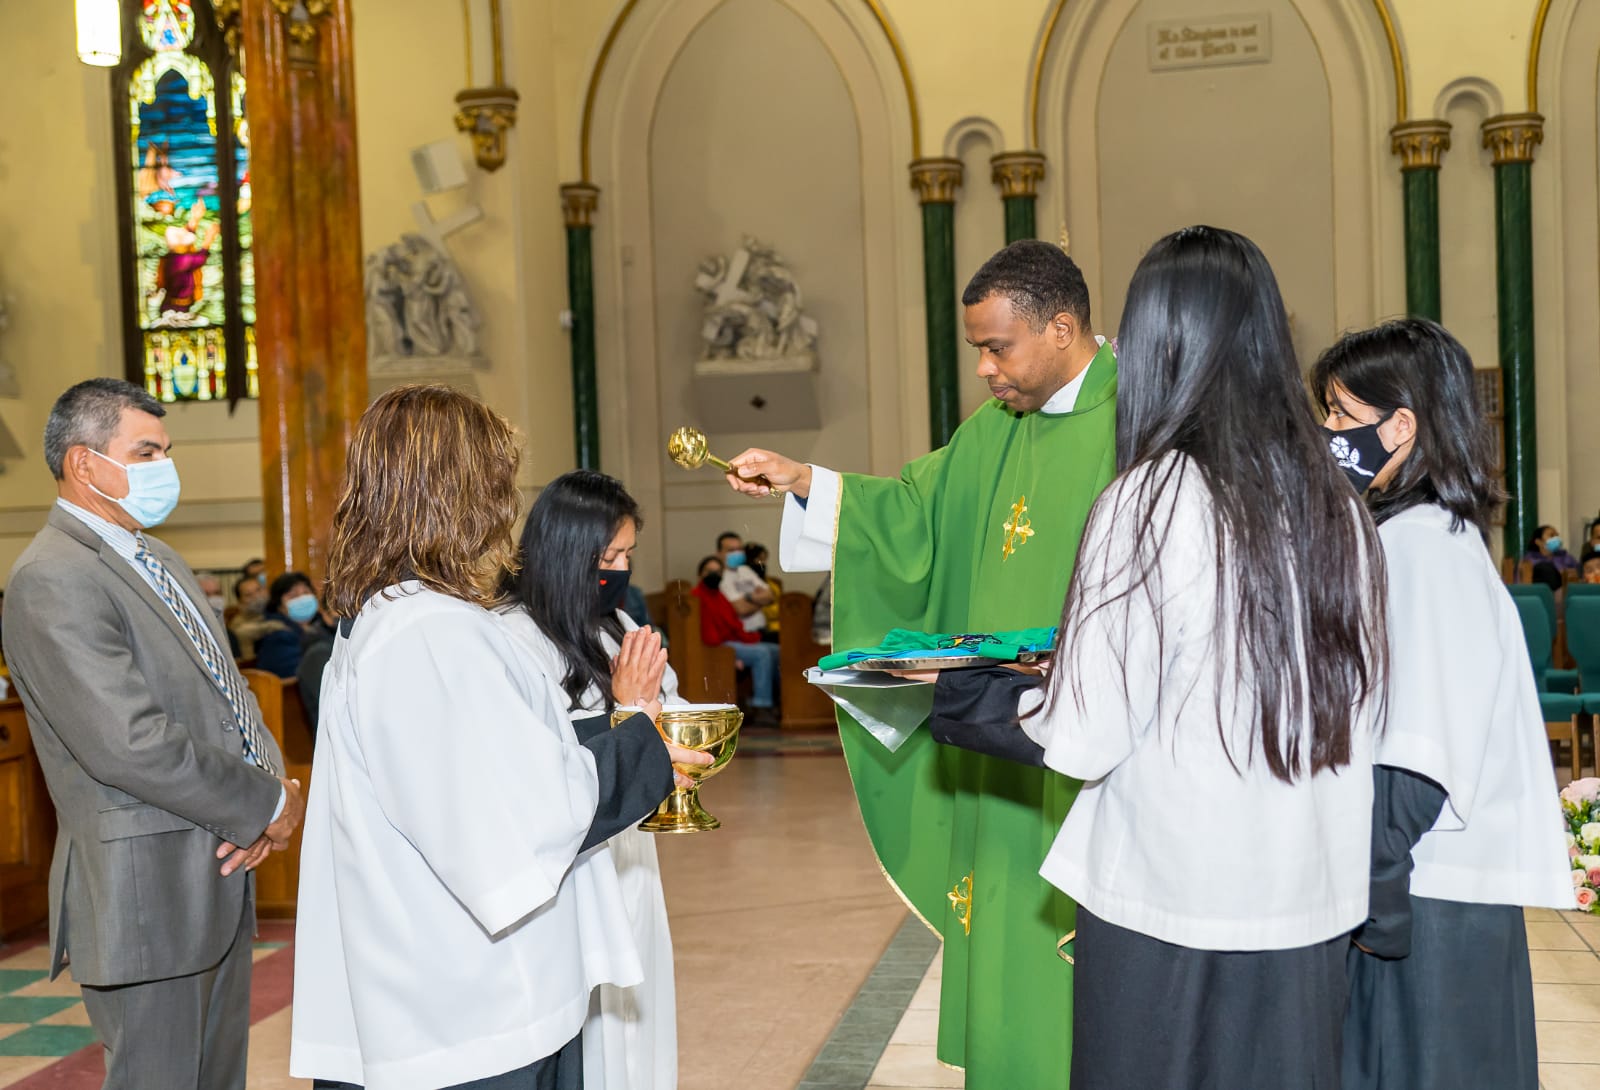 A priest is giving communion to people in the church.